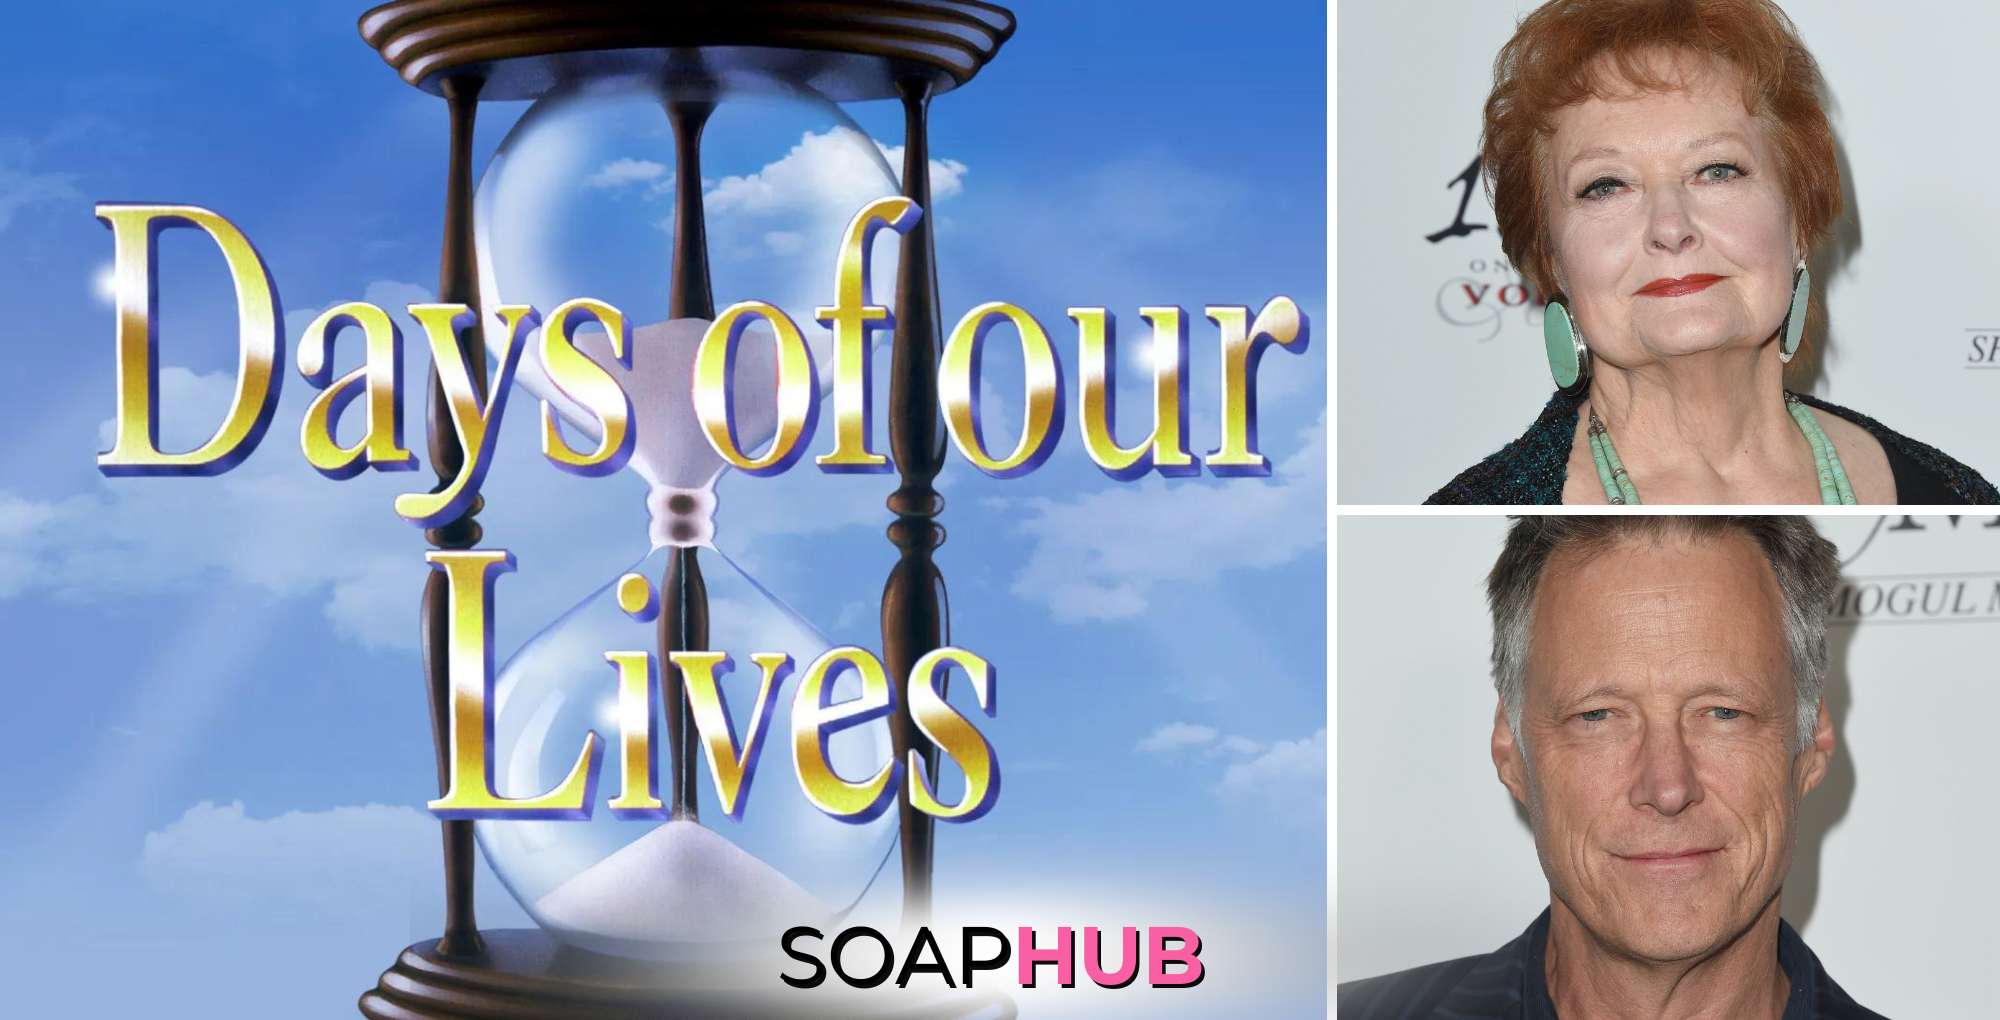 Days of our Lives Maree Cheatham and Matthew Ashford with the Soap Hub logo across the bottom.